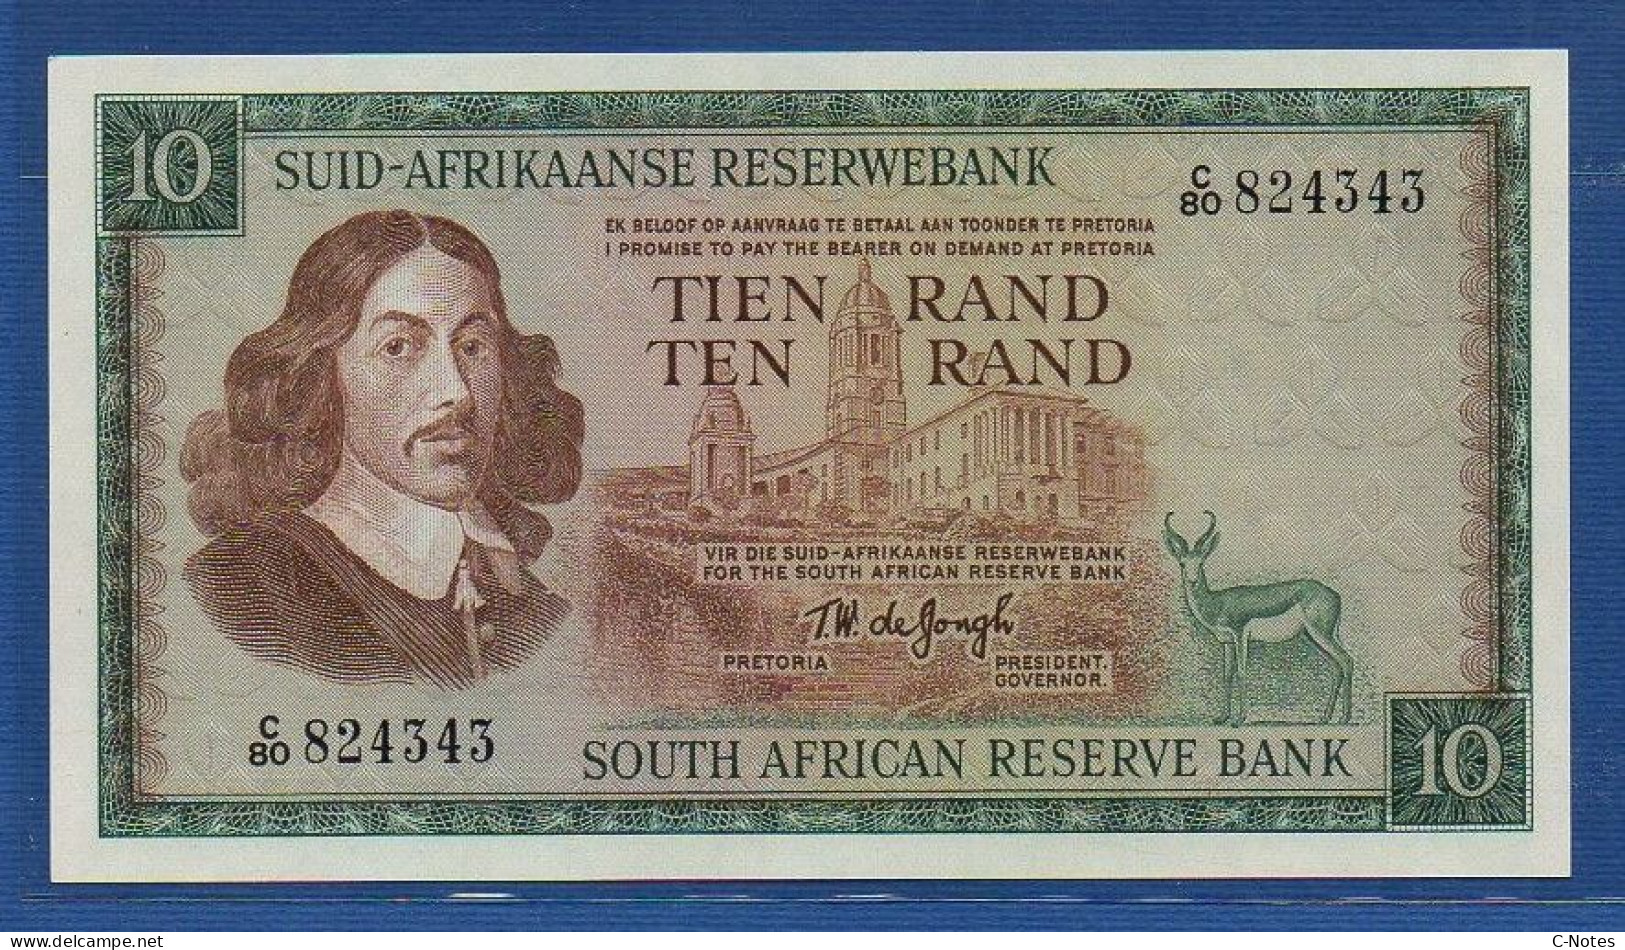 SOUTH AFRICA - P.114b – 10 RAND ND (1966 - 1976) UNC, S/n C/80 824343 Watermark: Springbok - South Africa